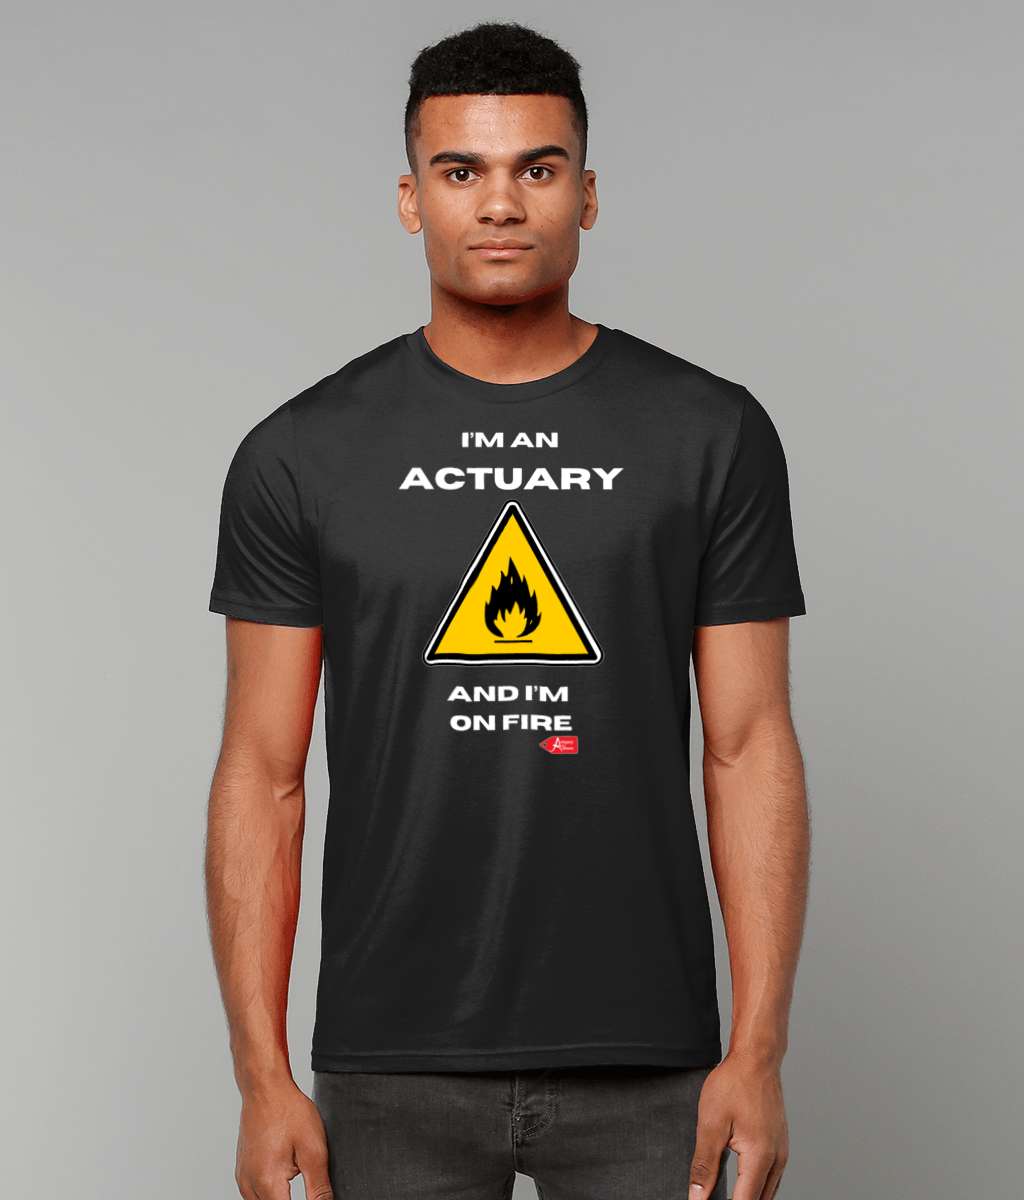 I'm An Actuary And I'm on Fire T-Shirt